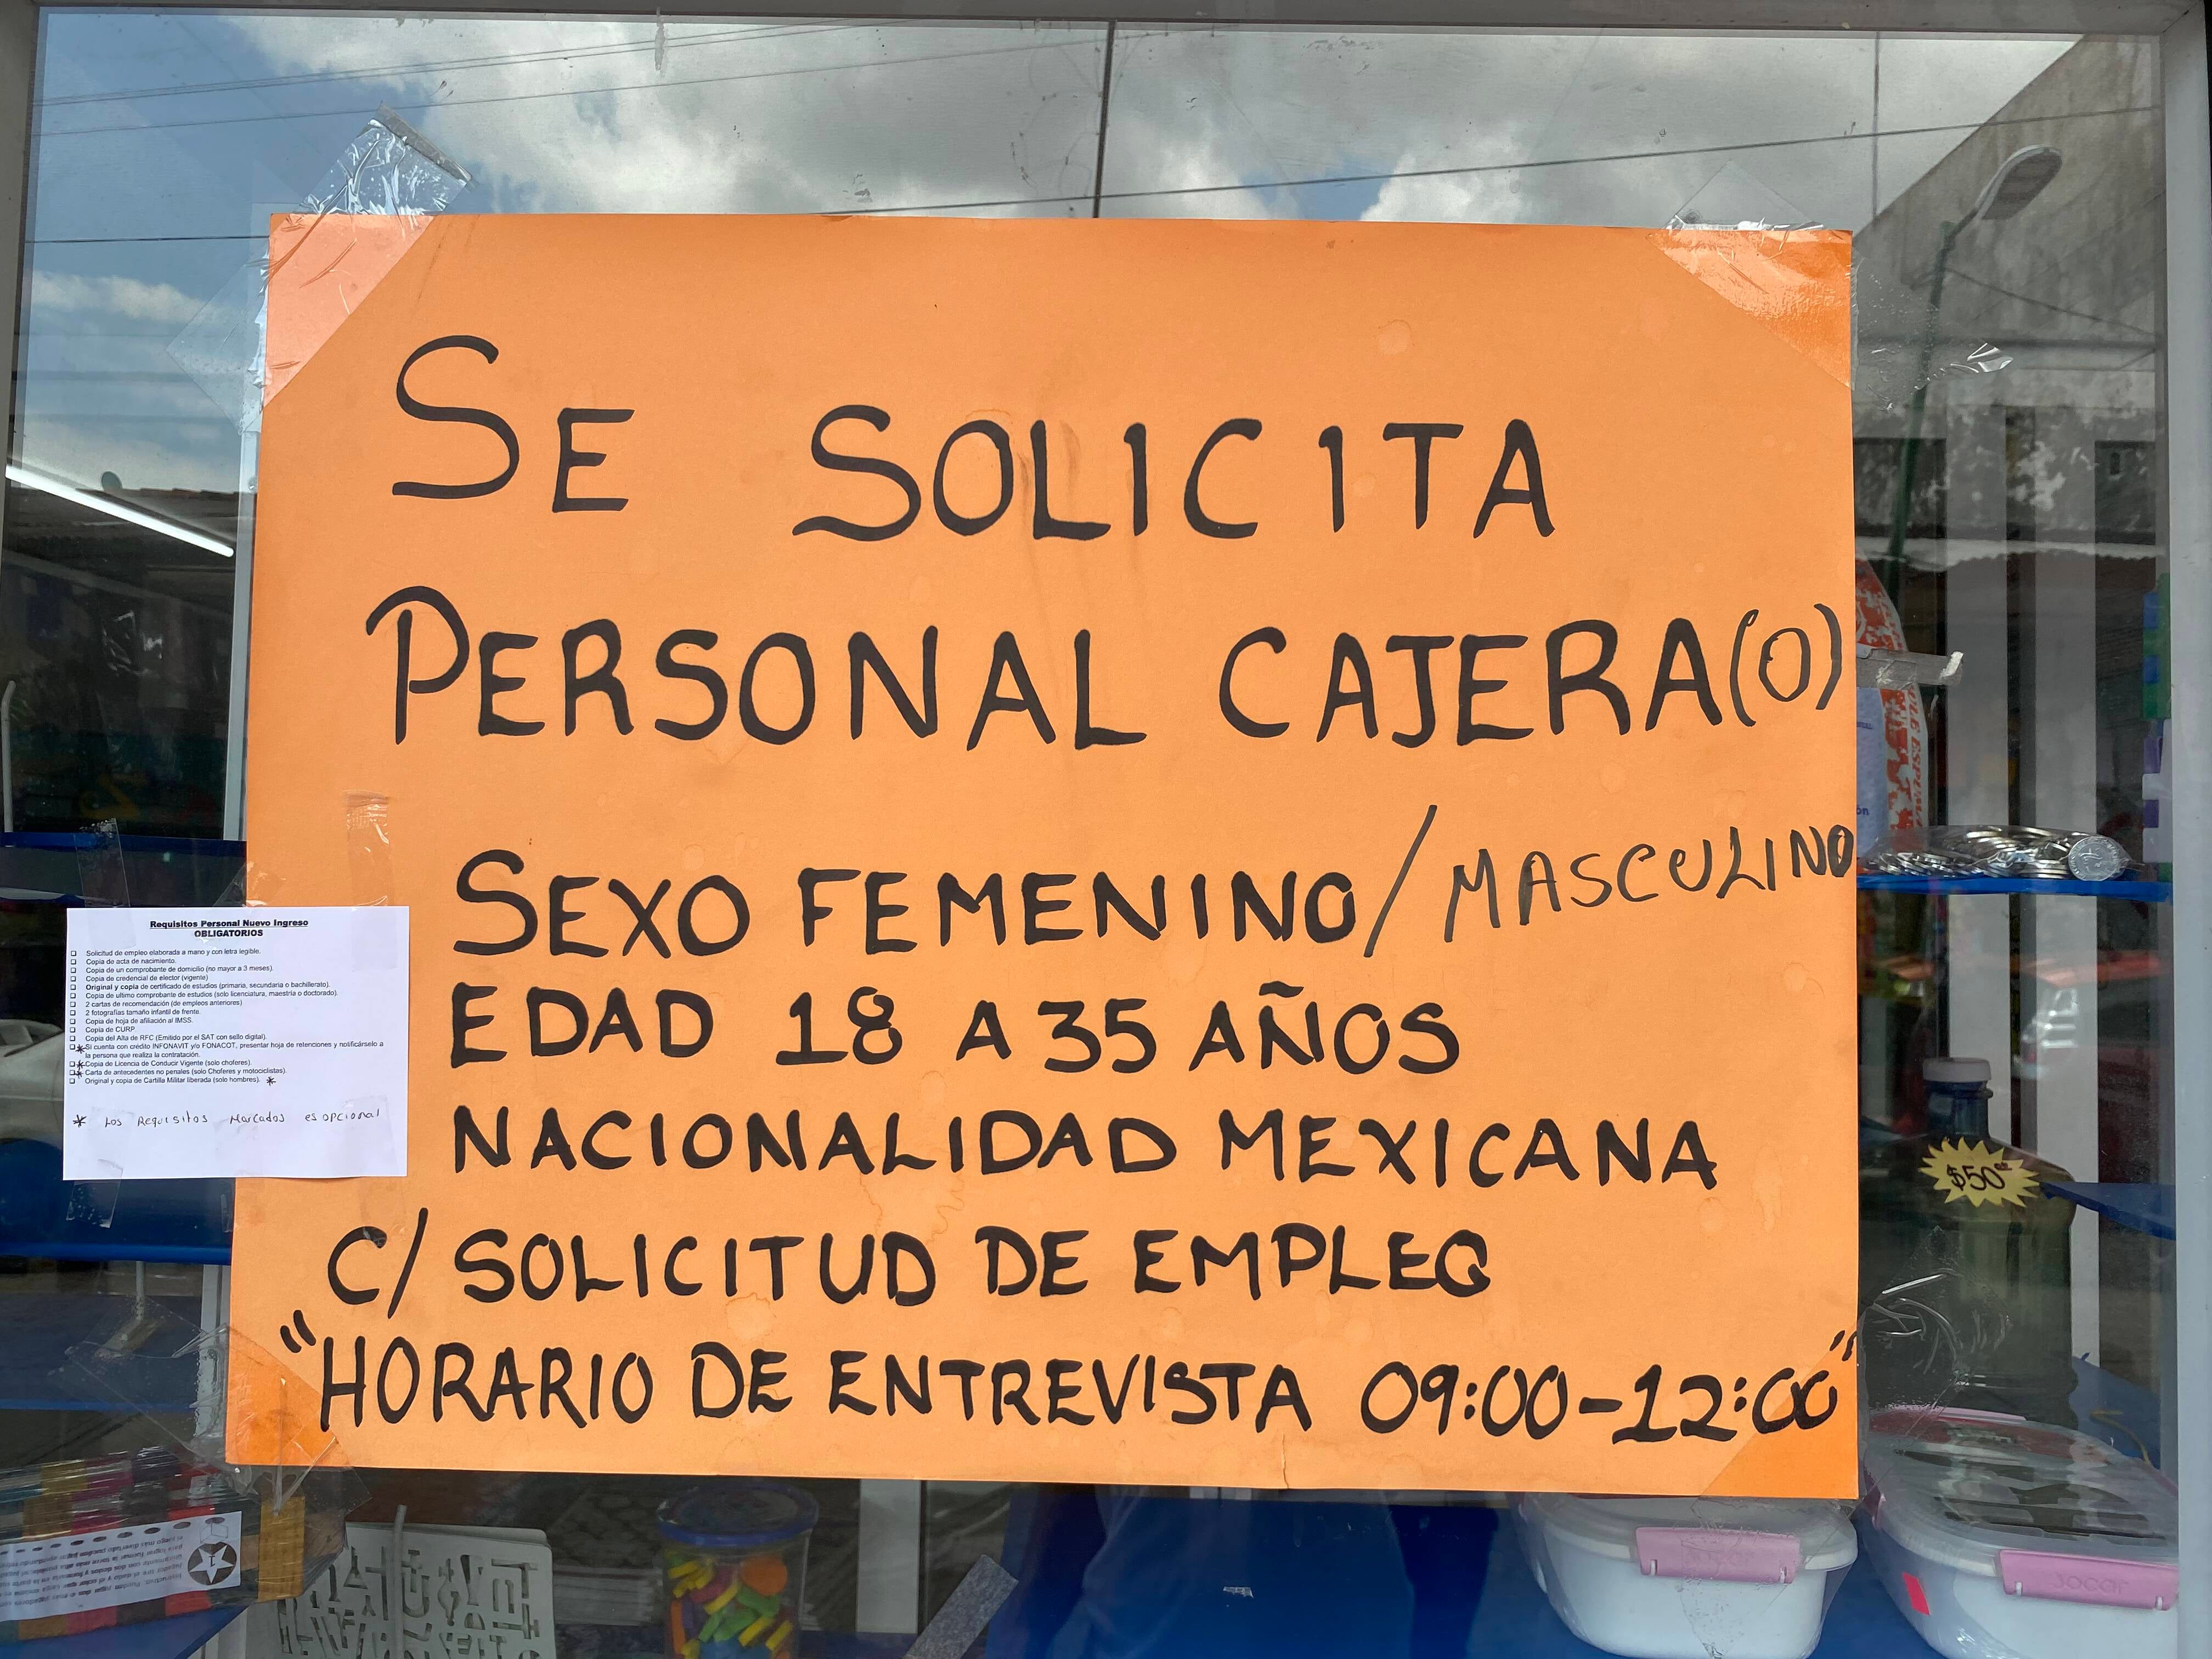 A sign posted outside a storefront in downtown Tapachula, Mexico advertises a vacancy for a job as a cashier, specifying “Mexican nationality” as a requirement to apply, August 15, 2021.